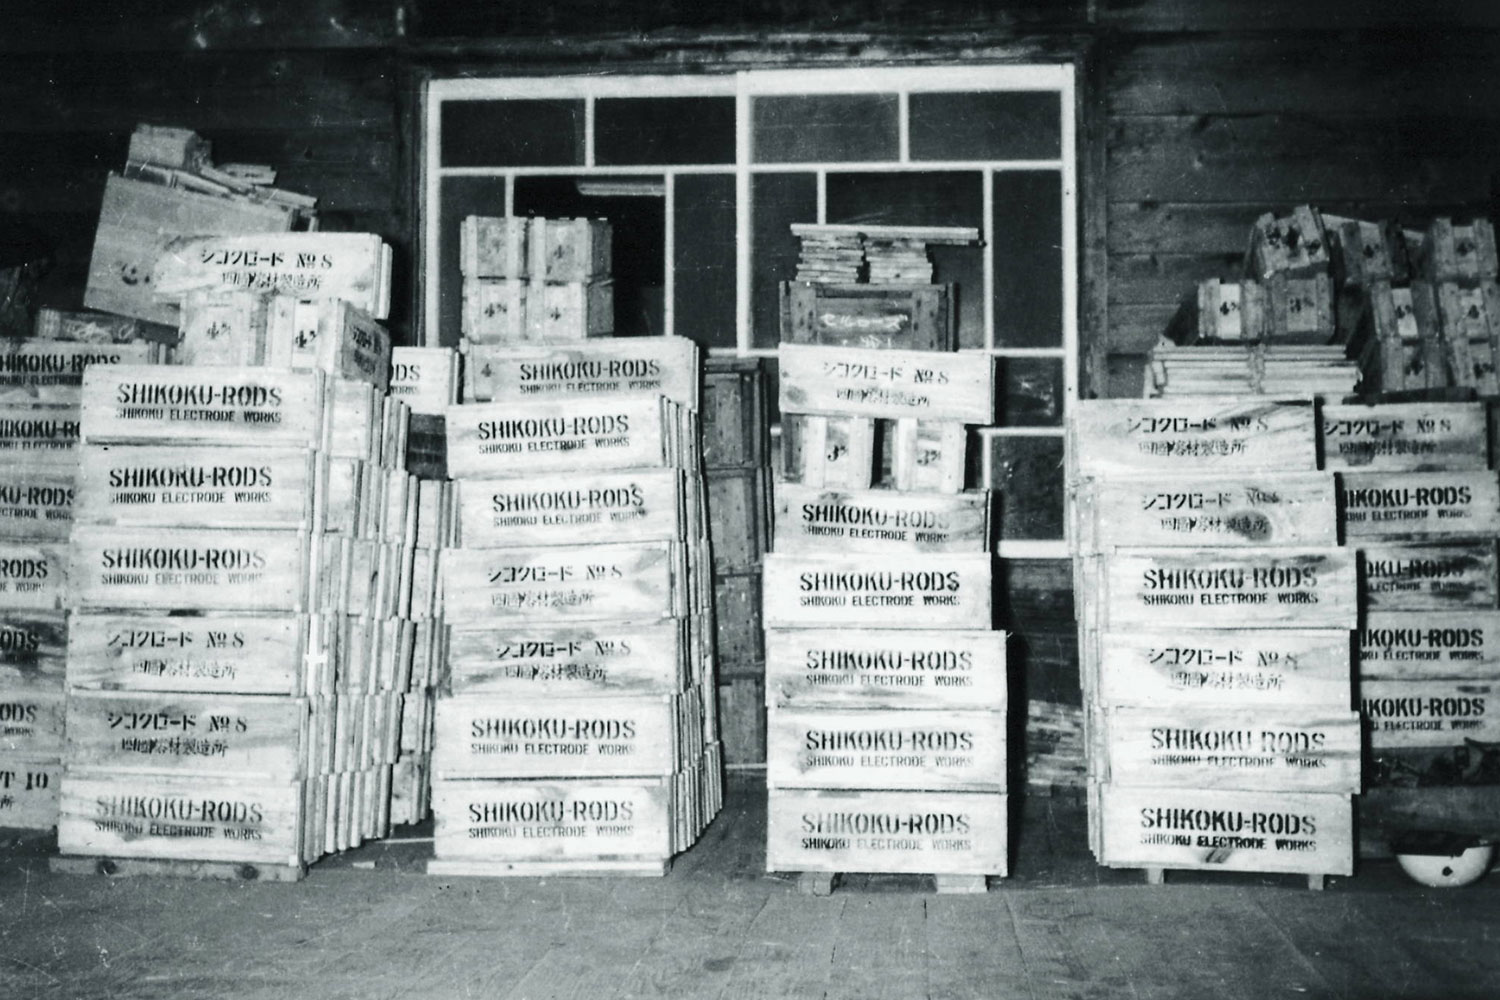 Packing boxes in the 60s